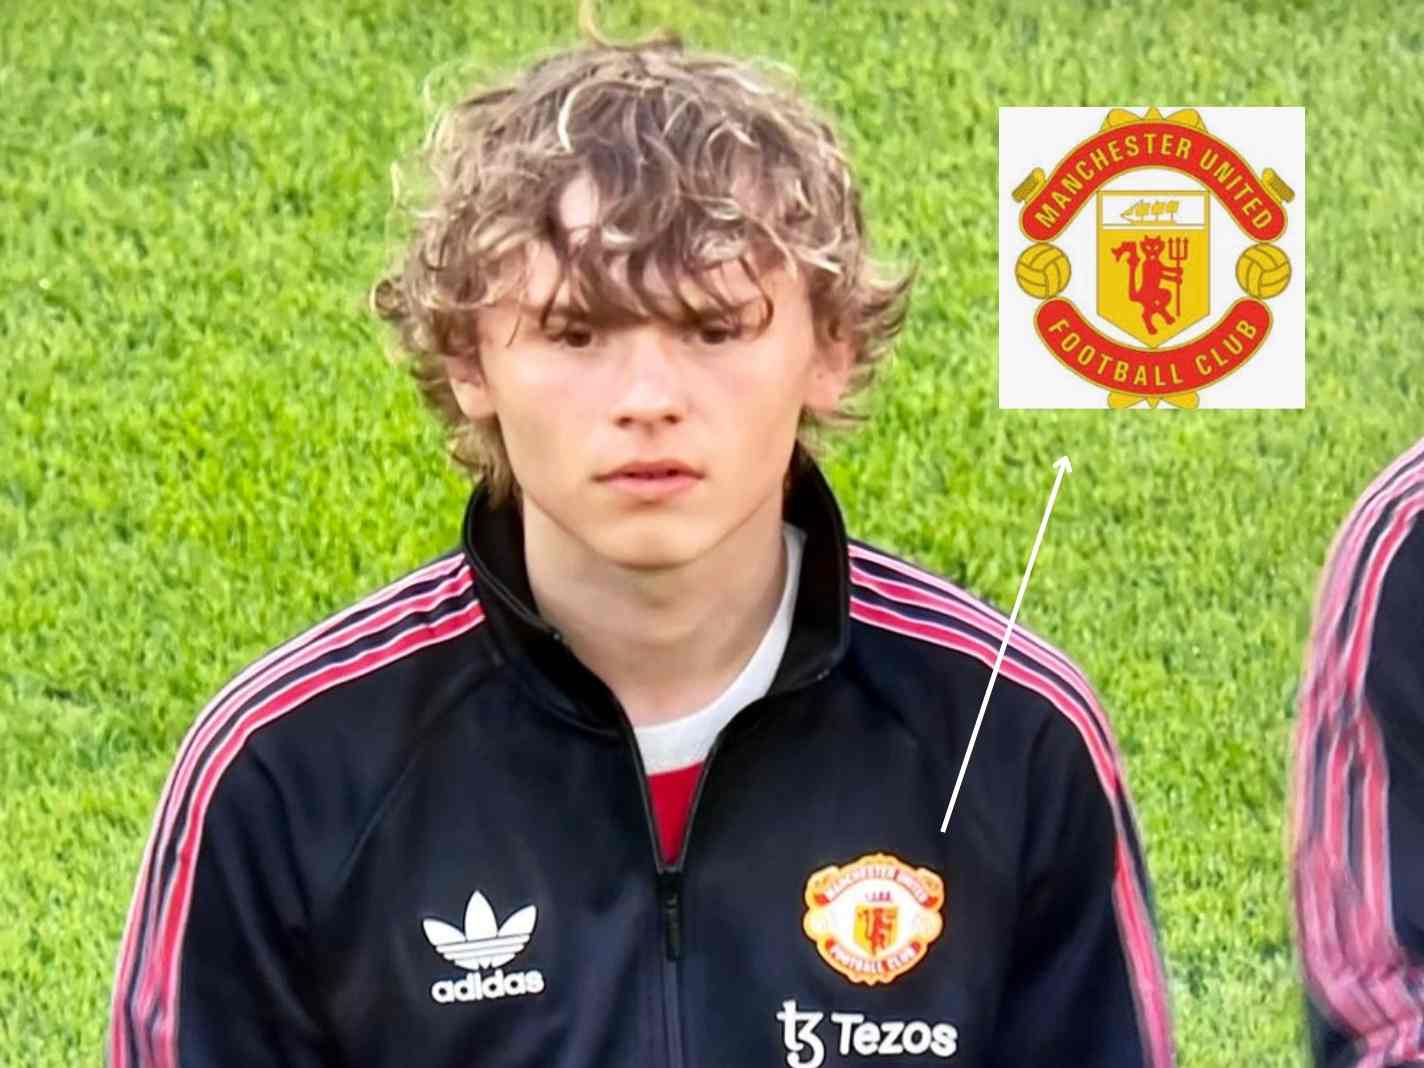 In this image - Man United youth player wearing jacket with old crest with letters 'Football Club'.